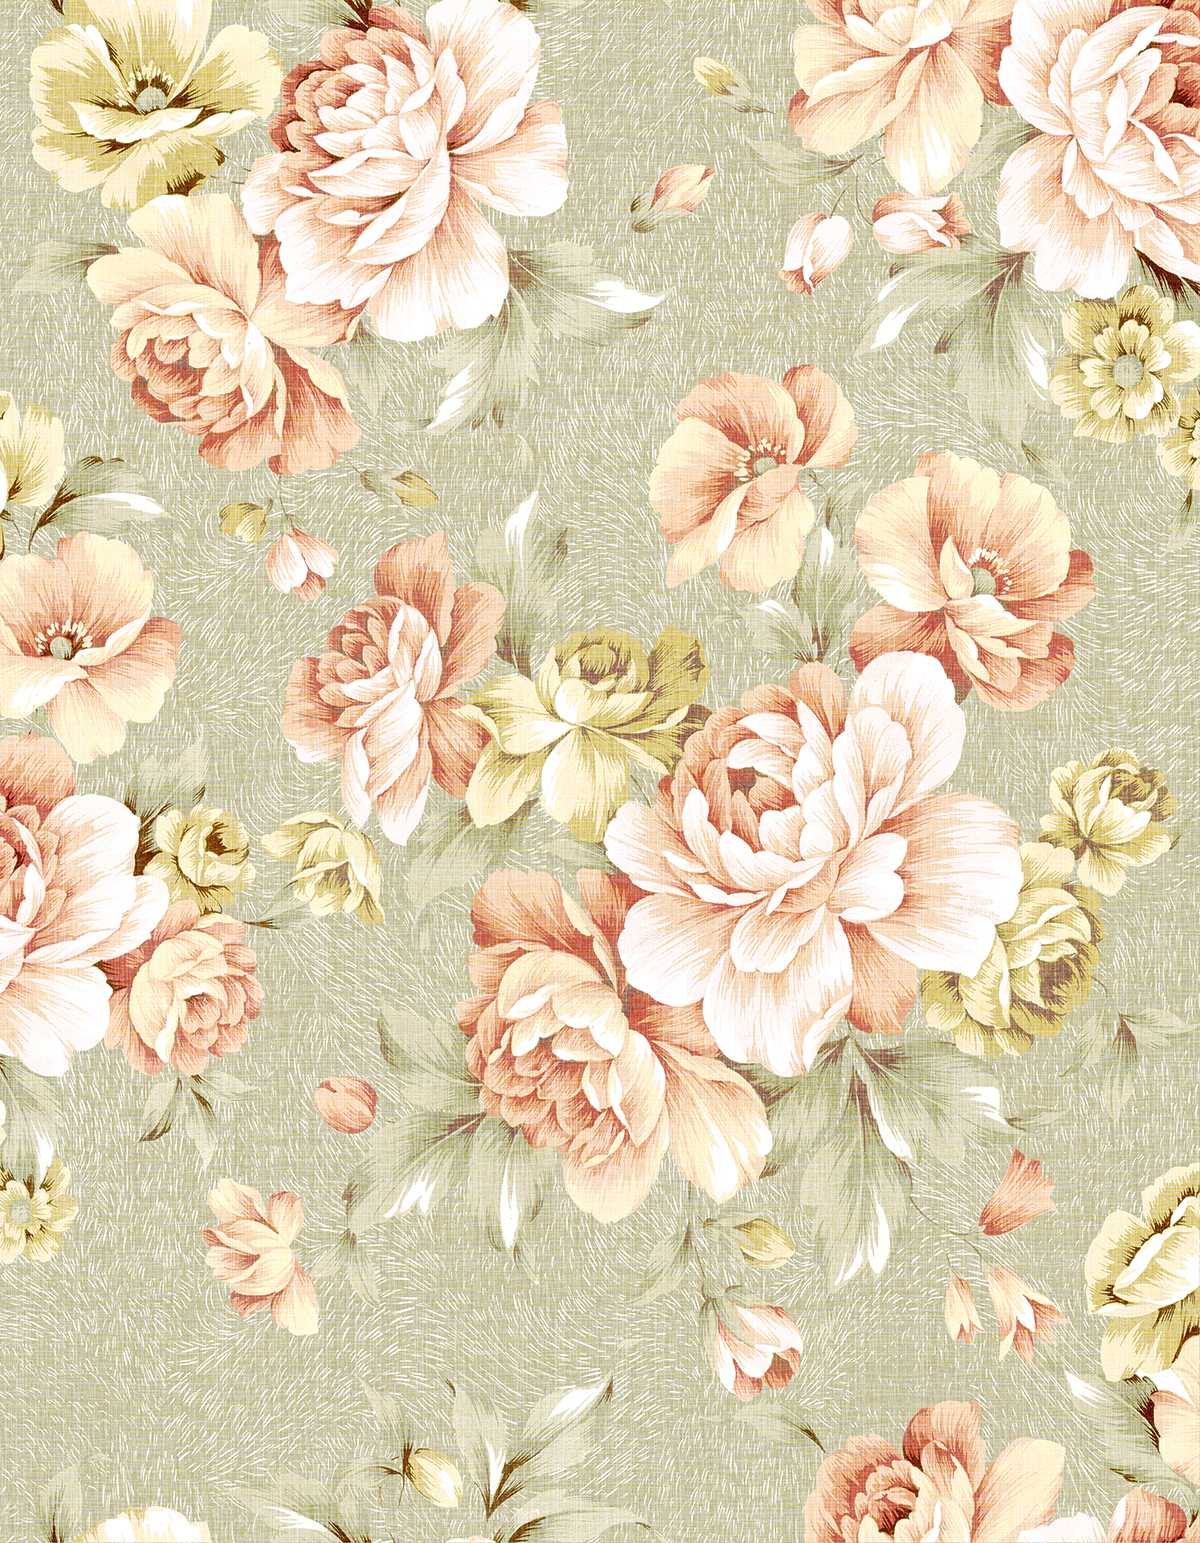 A floral pattern on a fabric